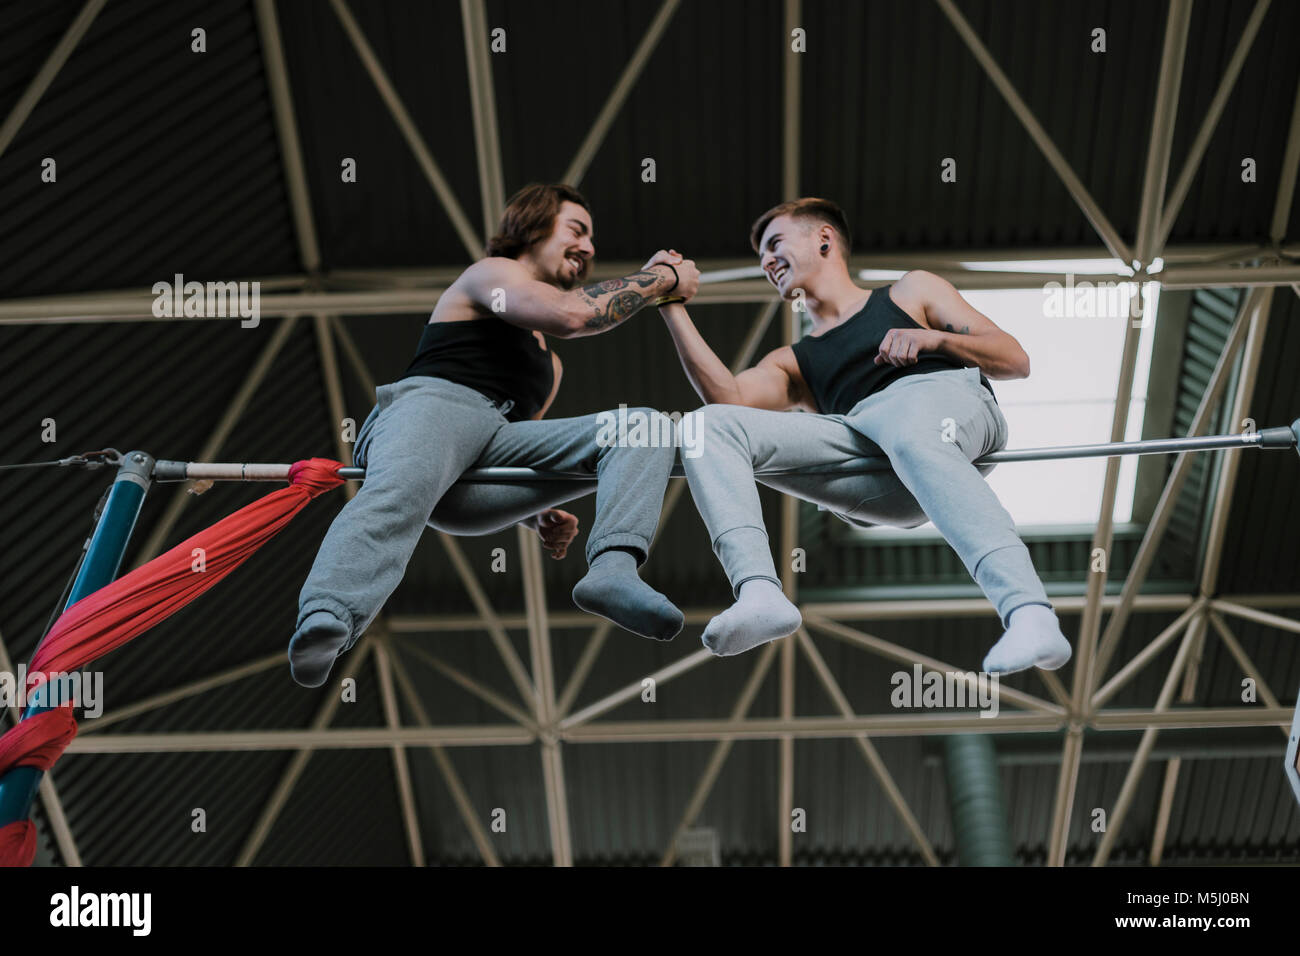 Two smiling gymnasts sitting on high bar shaking hands in gym Stock Photo